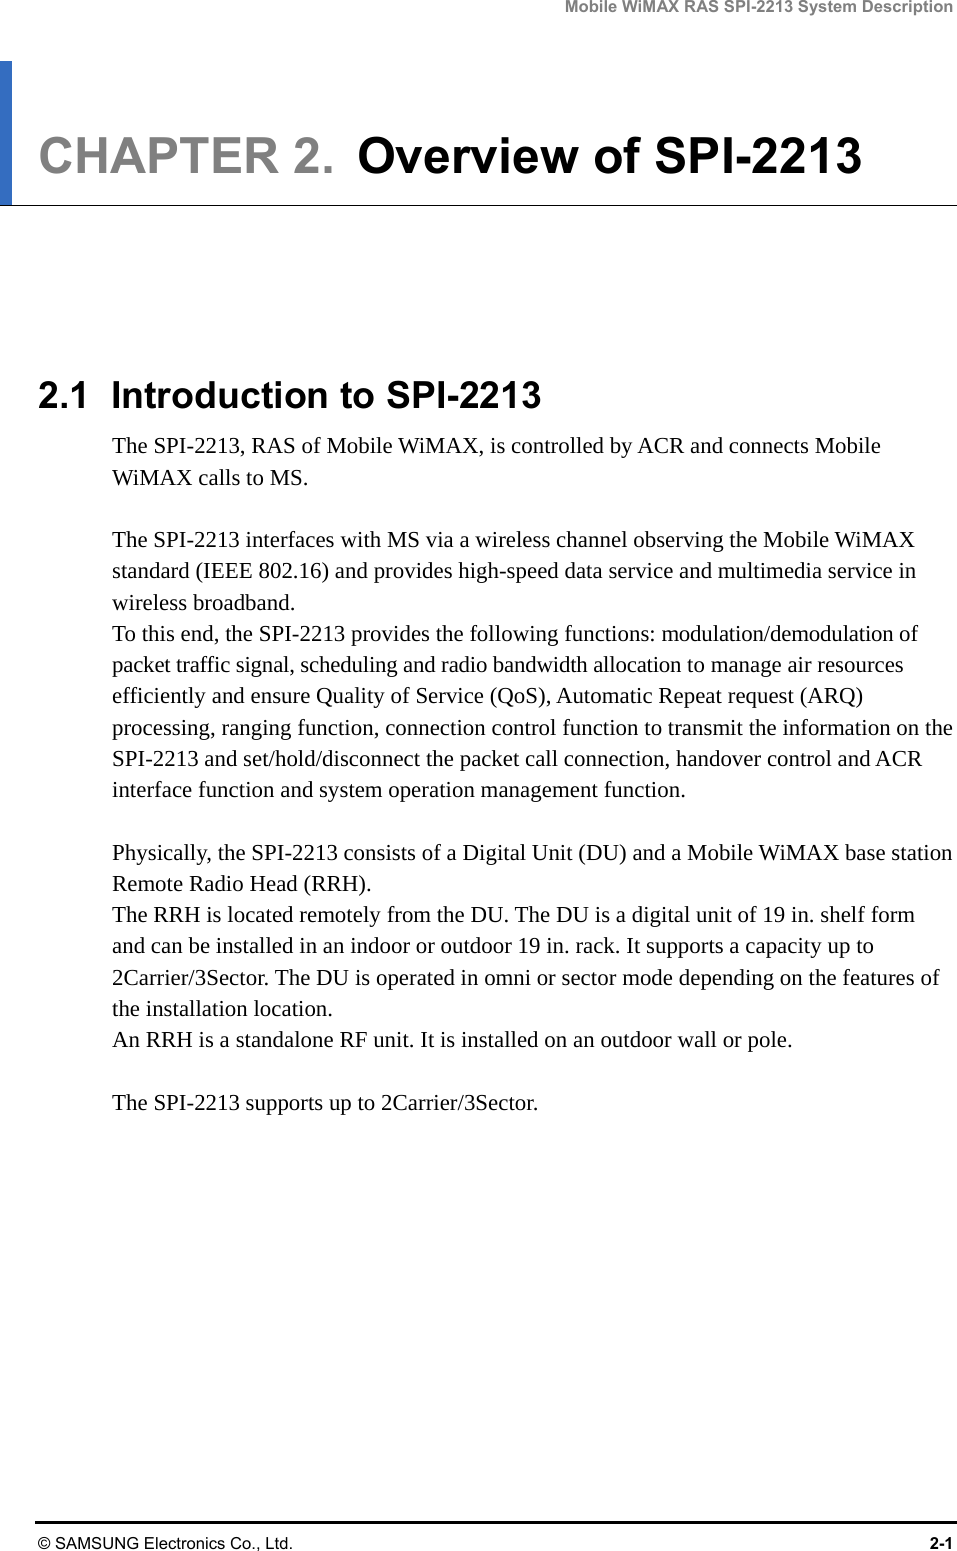 Mobile WiMAX RAS SPI-2213 System Description © SAMSUNG Electronics Co., Ltd.  2-1 CHAPTER 2.  Overview of SPI-2213      2.1 Introduction to SPI-2213 The SPI-2213, RAS of Mobile WiMAX, is controlled by ACR and connects Mobile WiMAX calls to MS.  The SPI-2213 interfaces with MS via a wireless channel observing the Mobile WiMAX standard (IEEE 802.16) and provides high-speed data service and multimedia service in wireless broadband. To this end, the SPI-2213 provides the following functions: modulation/demodulation of packet traffic signal, scheduling and radio bandwidth allocation to manage air resources efficiently and ensure Quality of Service (QoS), Automatic Repeat request (ARQ) processing, ranging function, connection control function to transmit the information on the SPI-2213 and set/hold/disconnect the packet call connection, handover control and ACR interface function and system operation management function.  Physically, the SPI-2213 consists of a Digital Unit (DU) and a Mobile WiMAX base station Remote Radio Head (RRH). The RRH is located remotely from the DU. The DU is a digital unit of 19 in. shelf form and can be installed in an indoor or outdoor 19 in. rack. It supports a capacity up to 2Carrier/3Sector. The DU is operated in omni or sector mode depending on the features of the installation location. An RRH is a standalone RF unit. It is installed on an outdoor wall or pole.  The SPI-2213 supports up to 2Carrier/3Sector. 